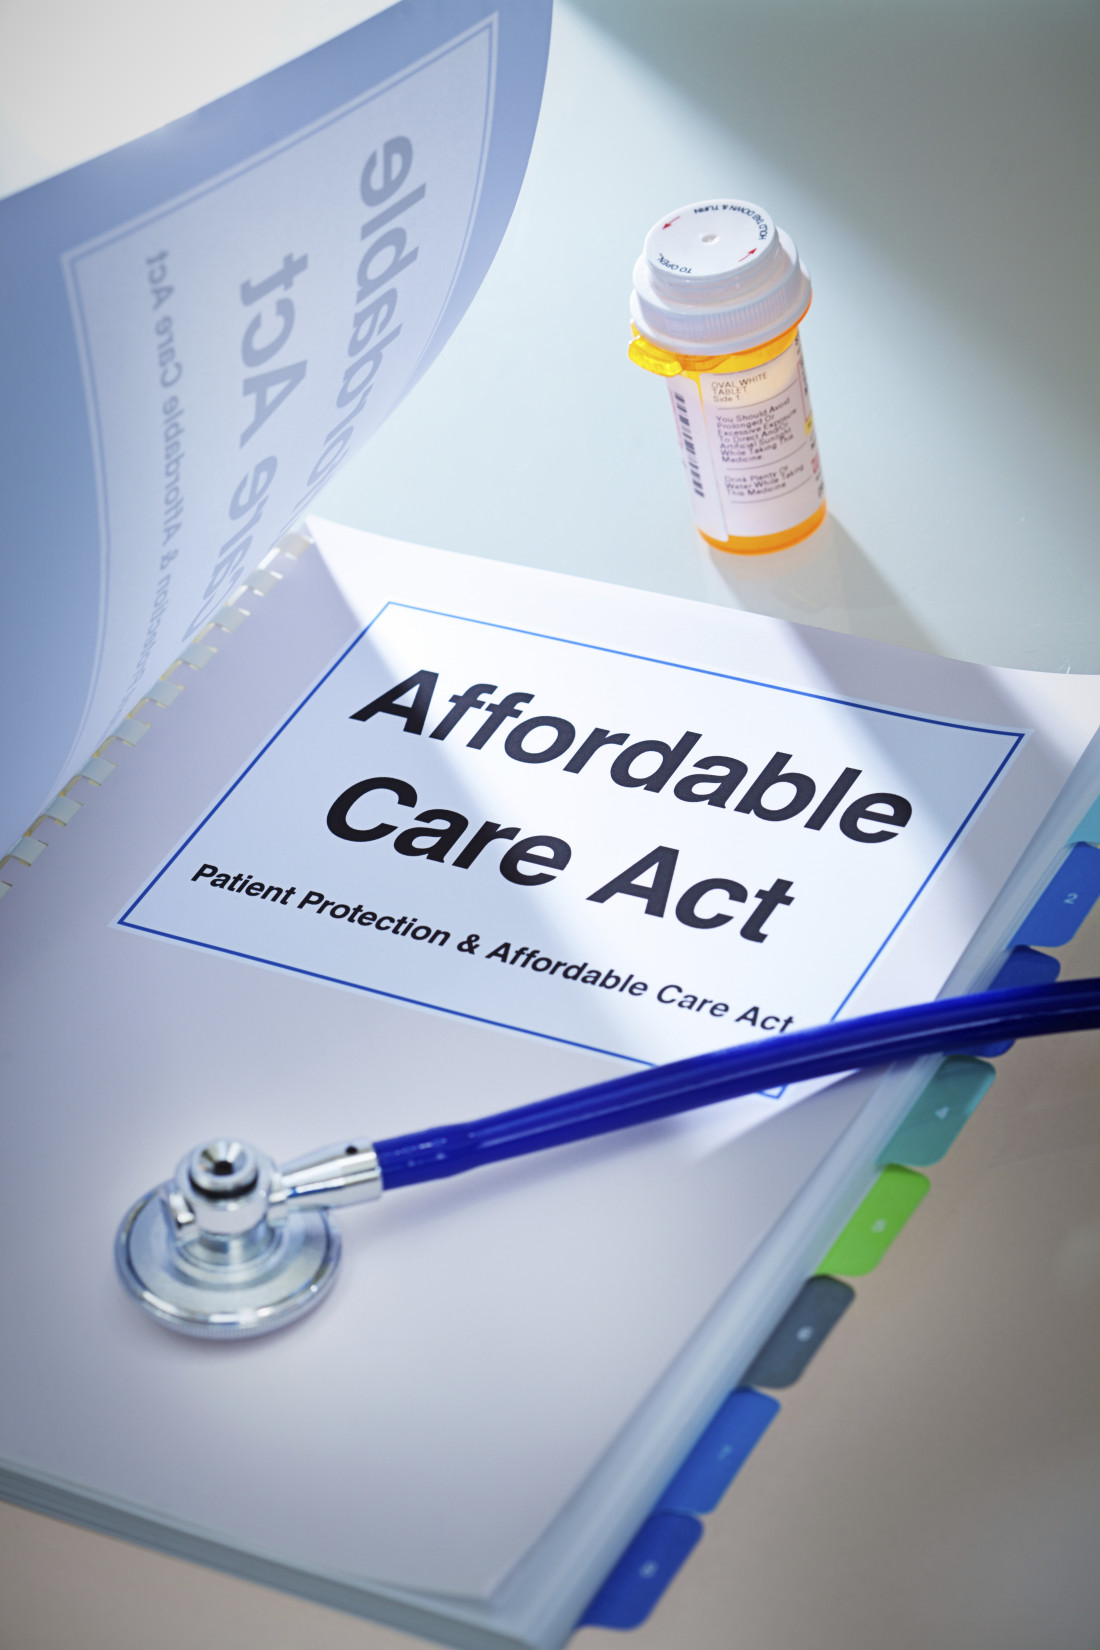 Legislation introduced to repeal portions of the Affordable Care Act